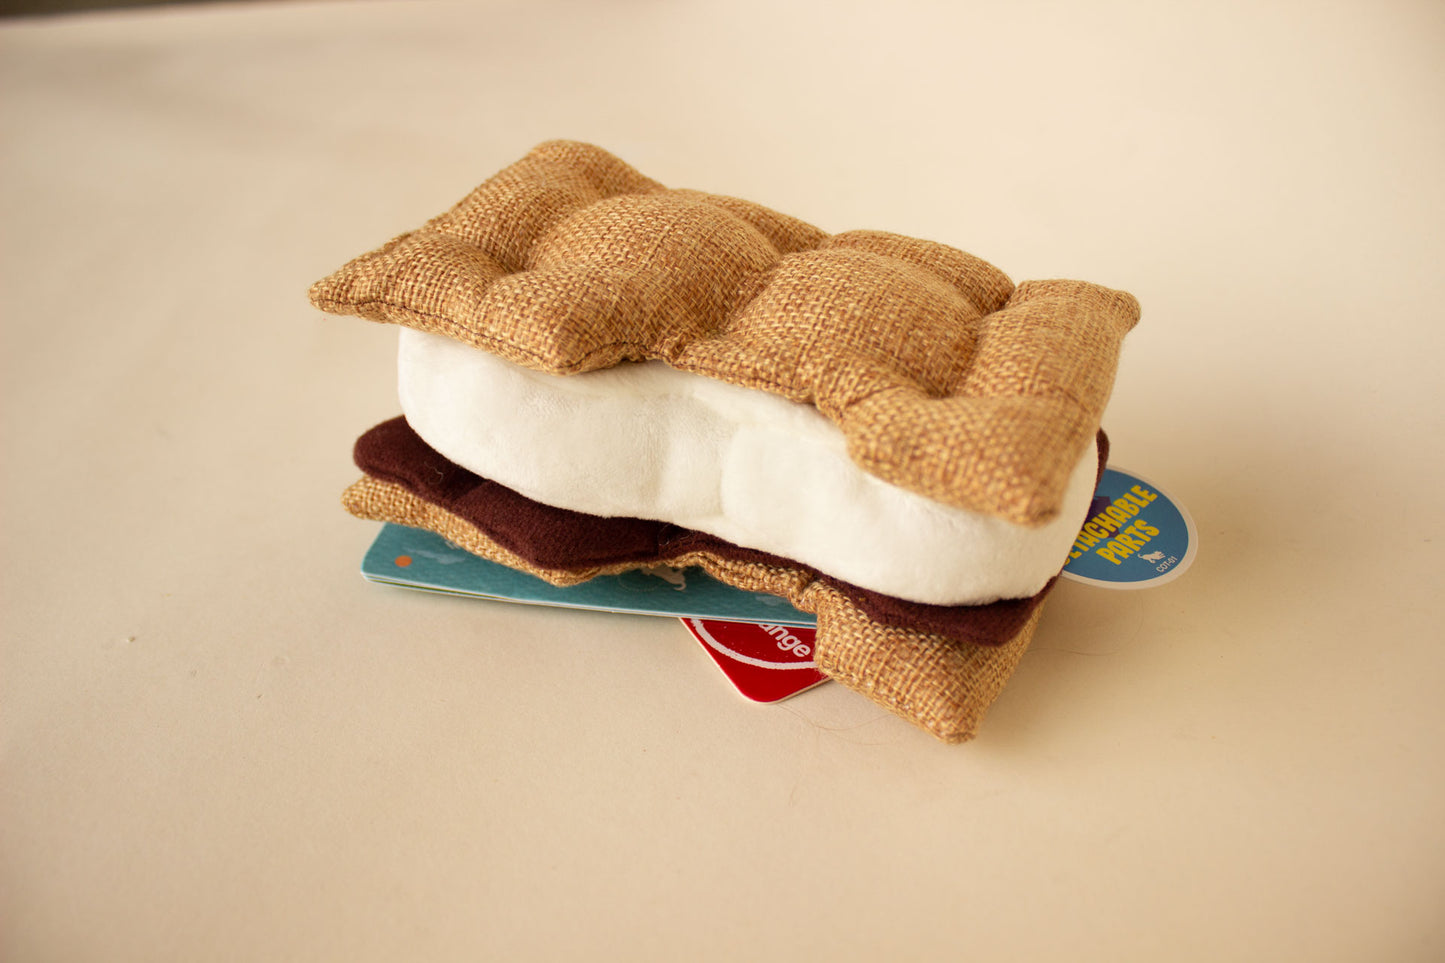 Camp S'more Toy